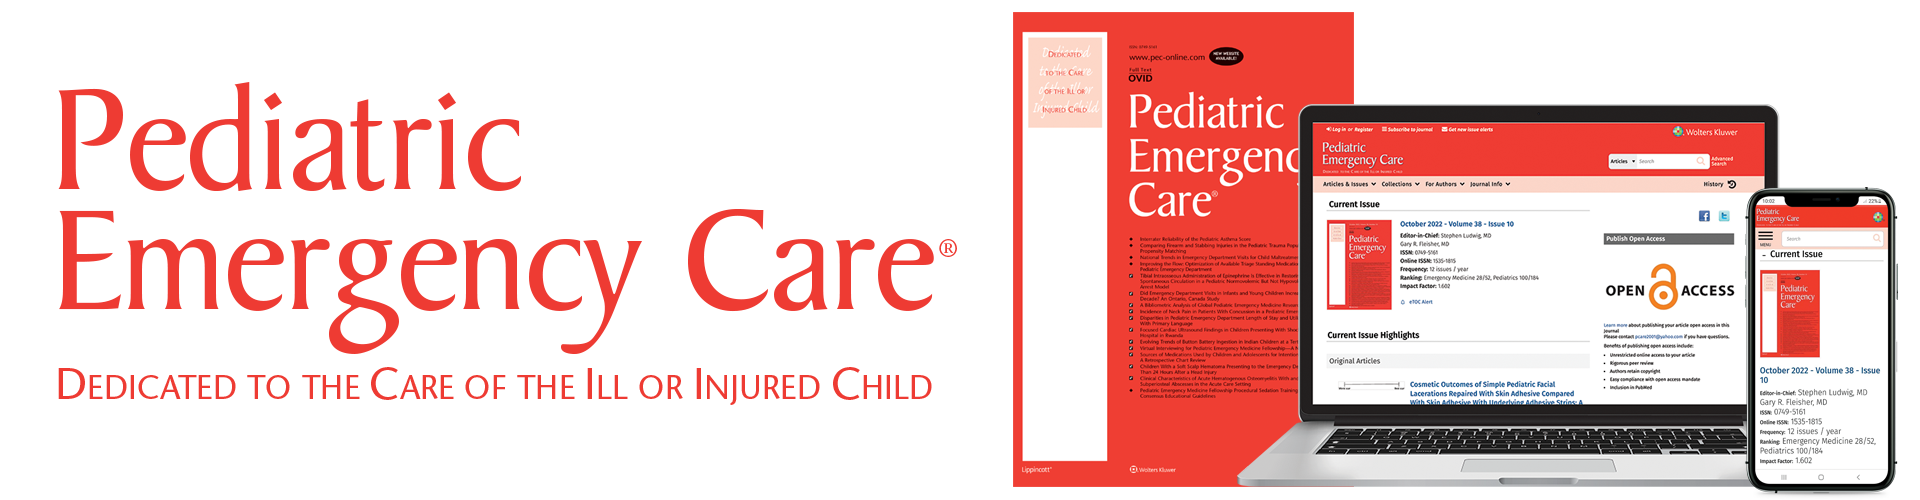 Pediatric Emergency Care Dedidated to the Care of the Ill or Injured Child banner